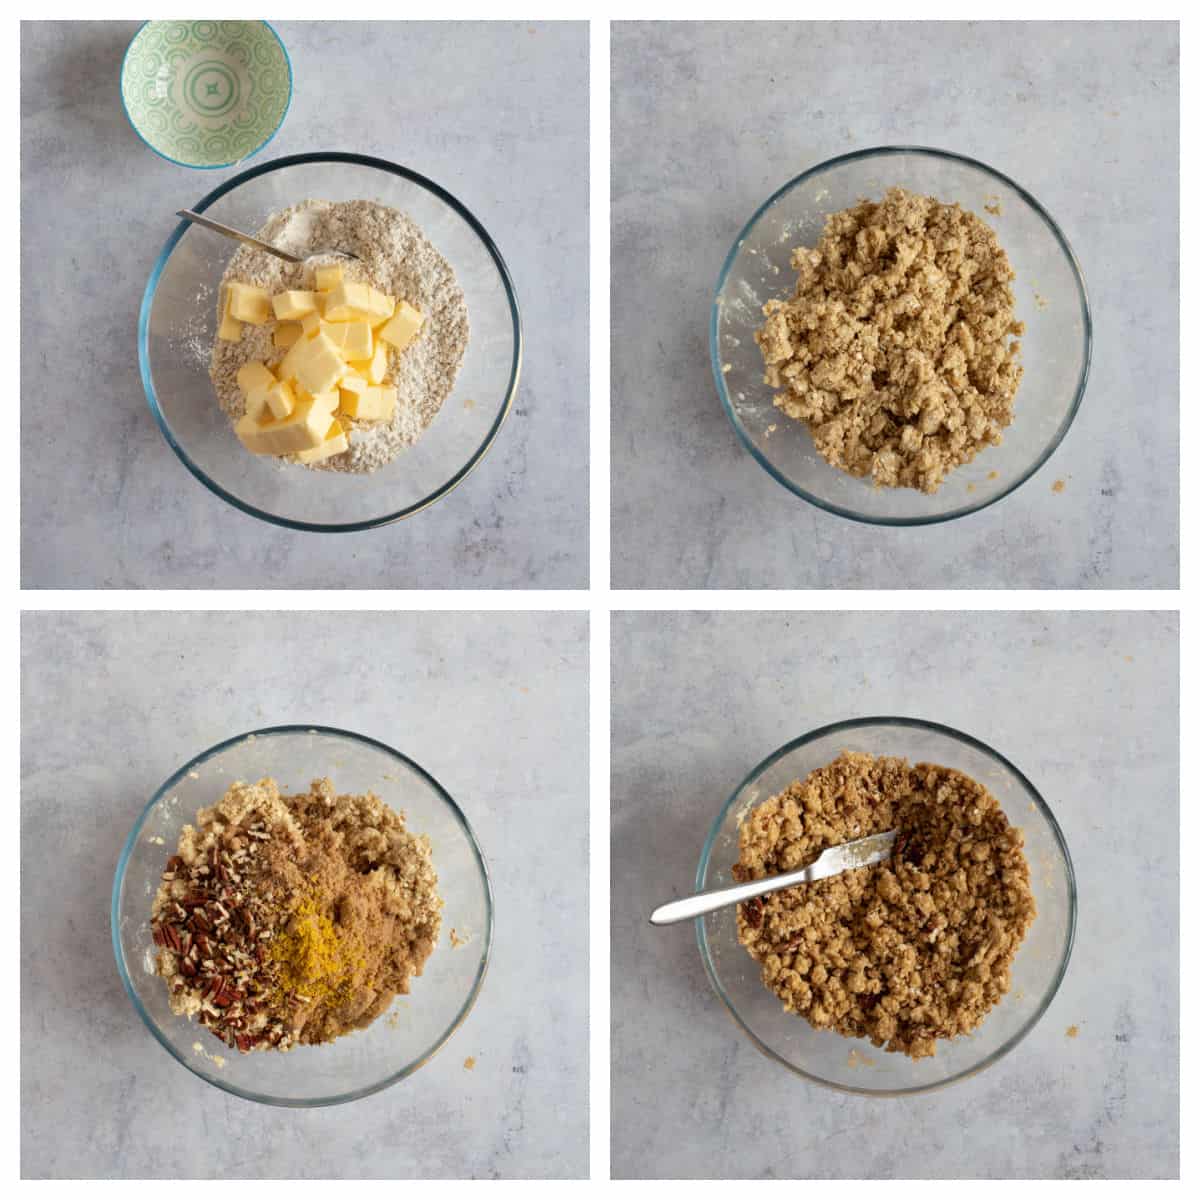 Step by step photo instructions for making crumble topping using the rubbing in method.